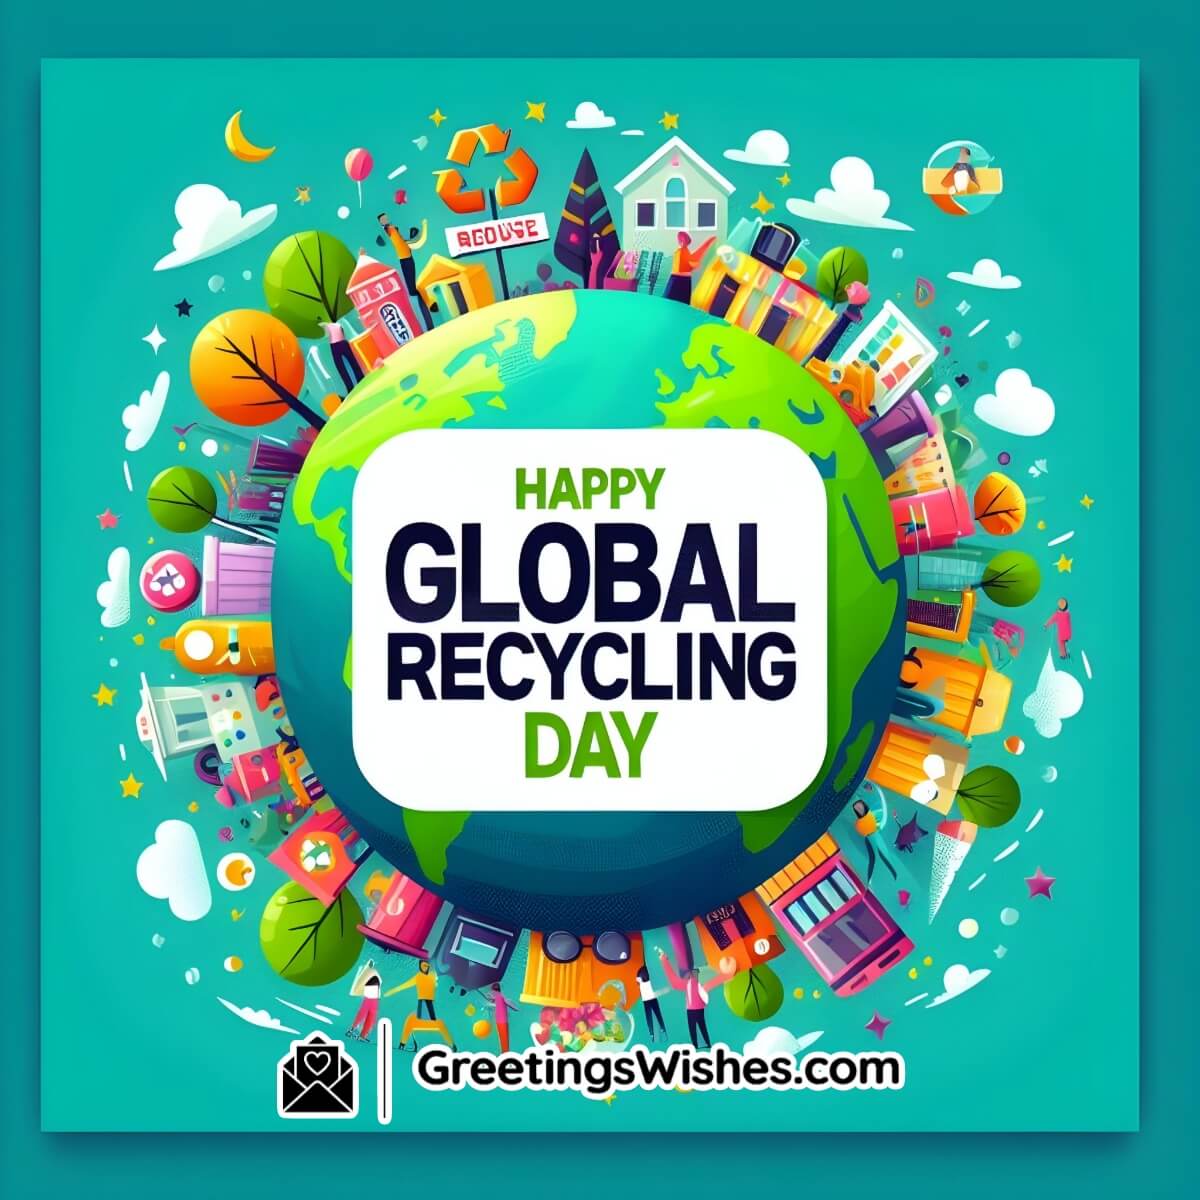 Happy Global Recycling Day